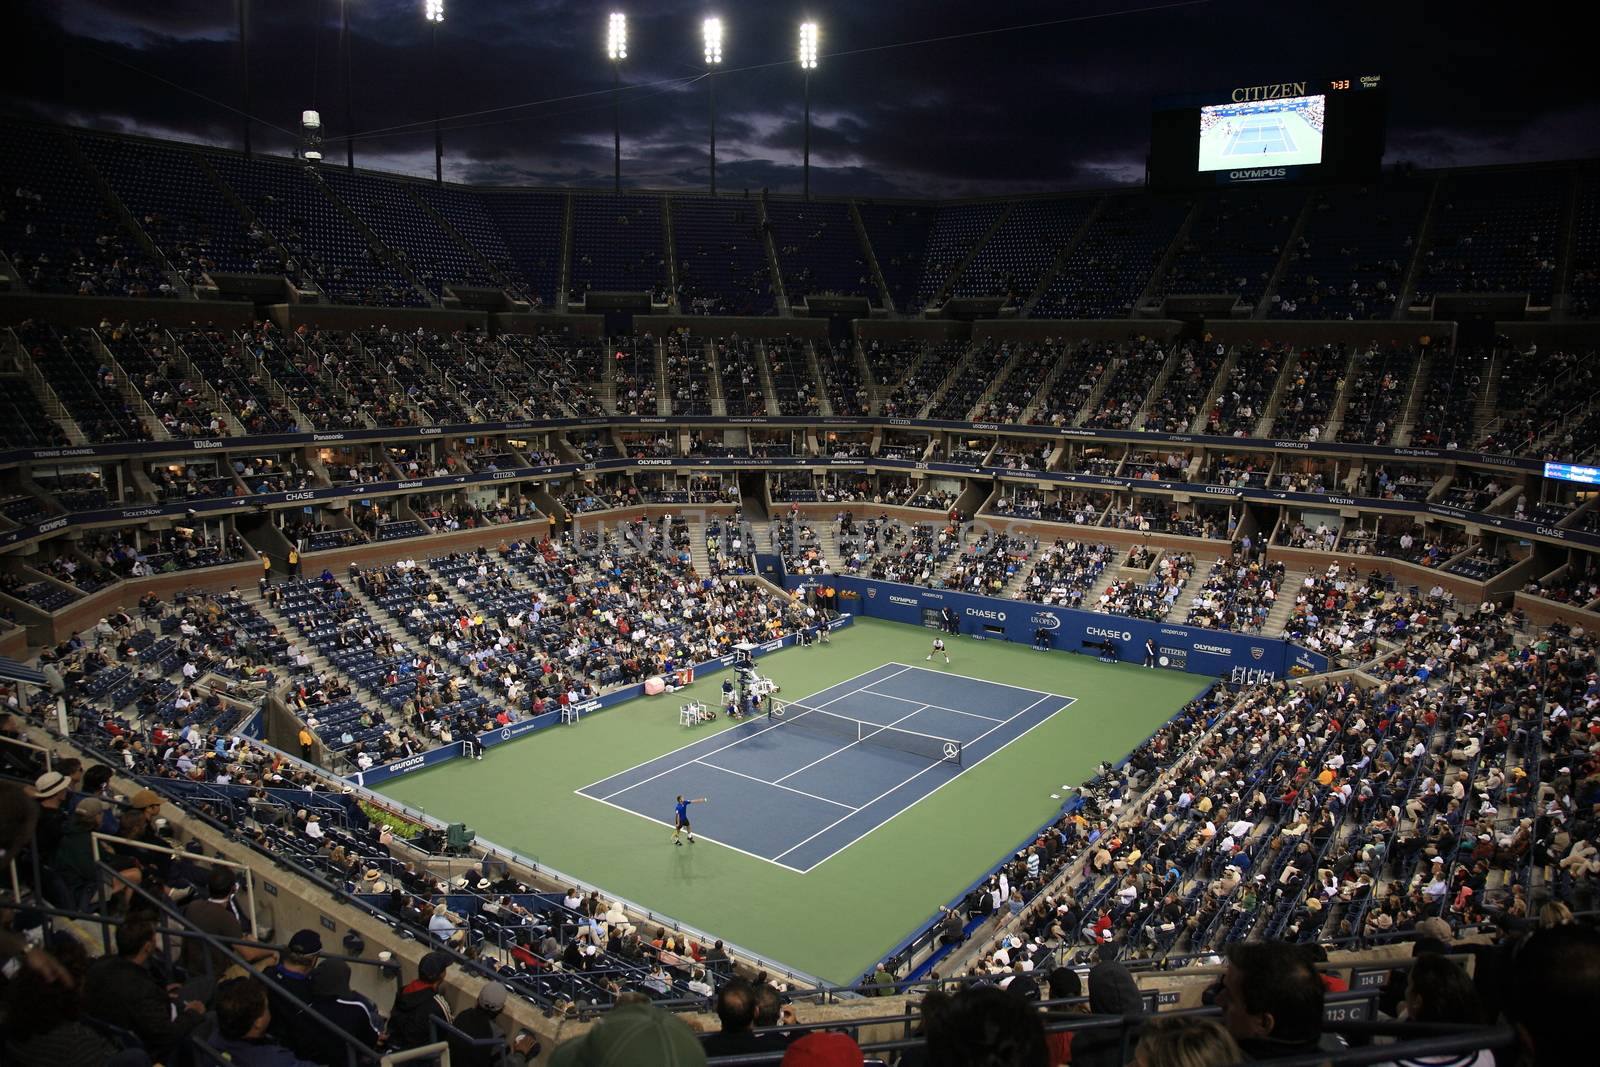 A crowded Arthur Ashe Stadium for a night U.S. Open tennis match in Queens, New York City.